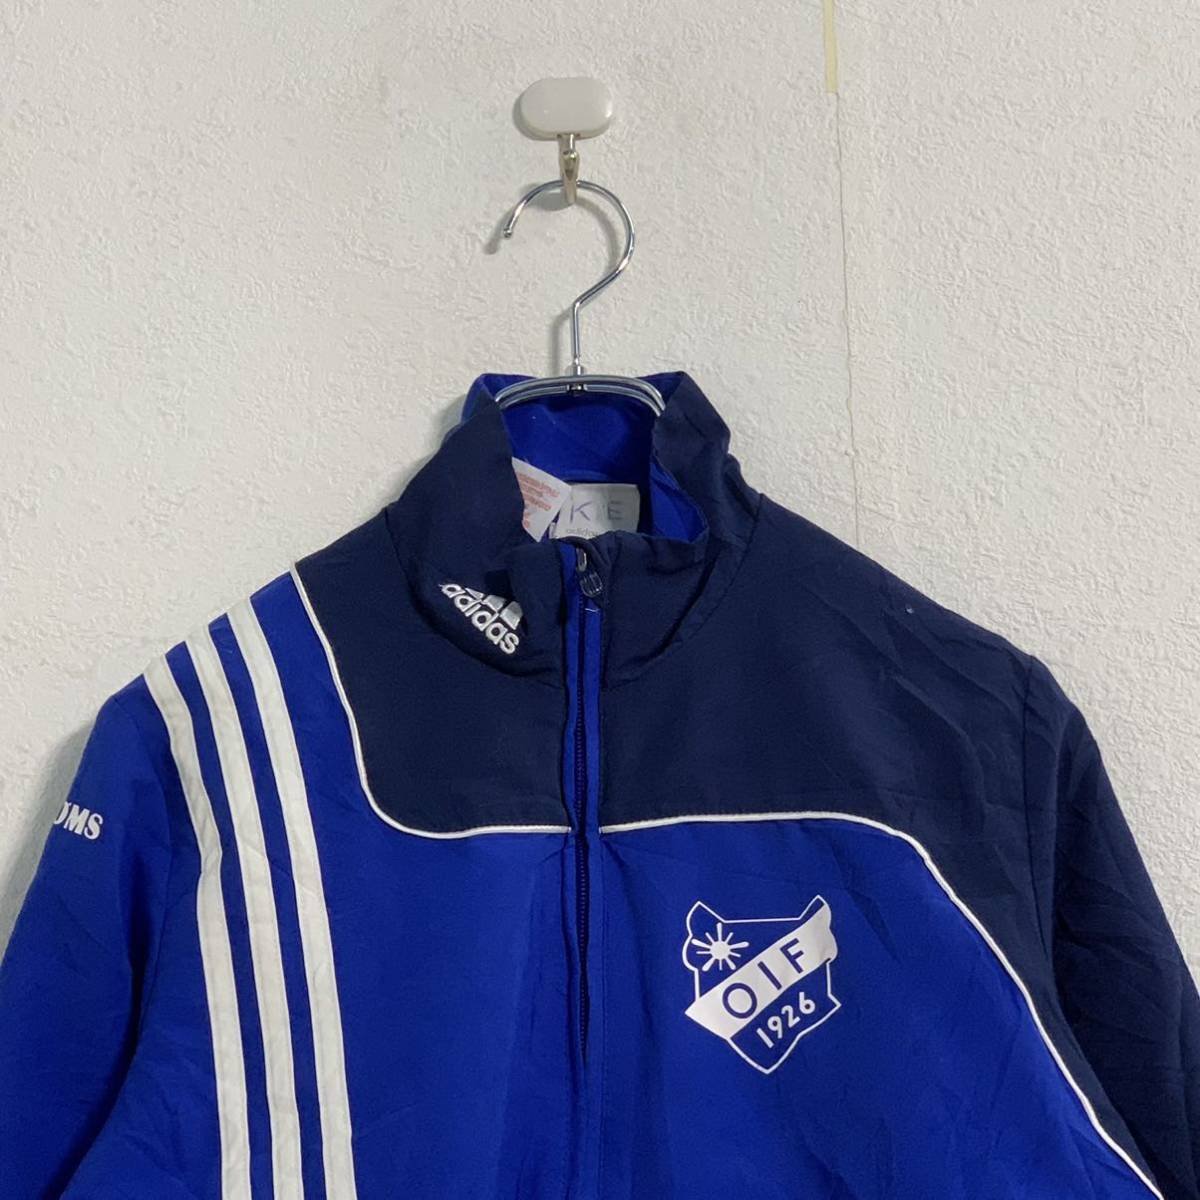 adidas sweat Logo print jersey Youth size Kids 150 blue Adidas old clothes . America buying up a508-6600